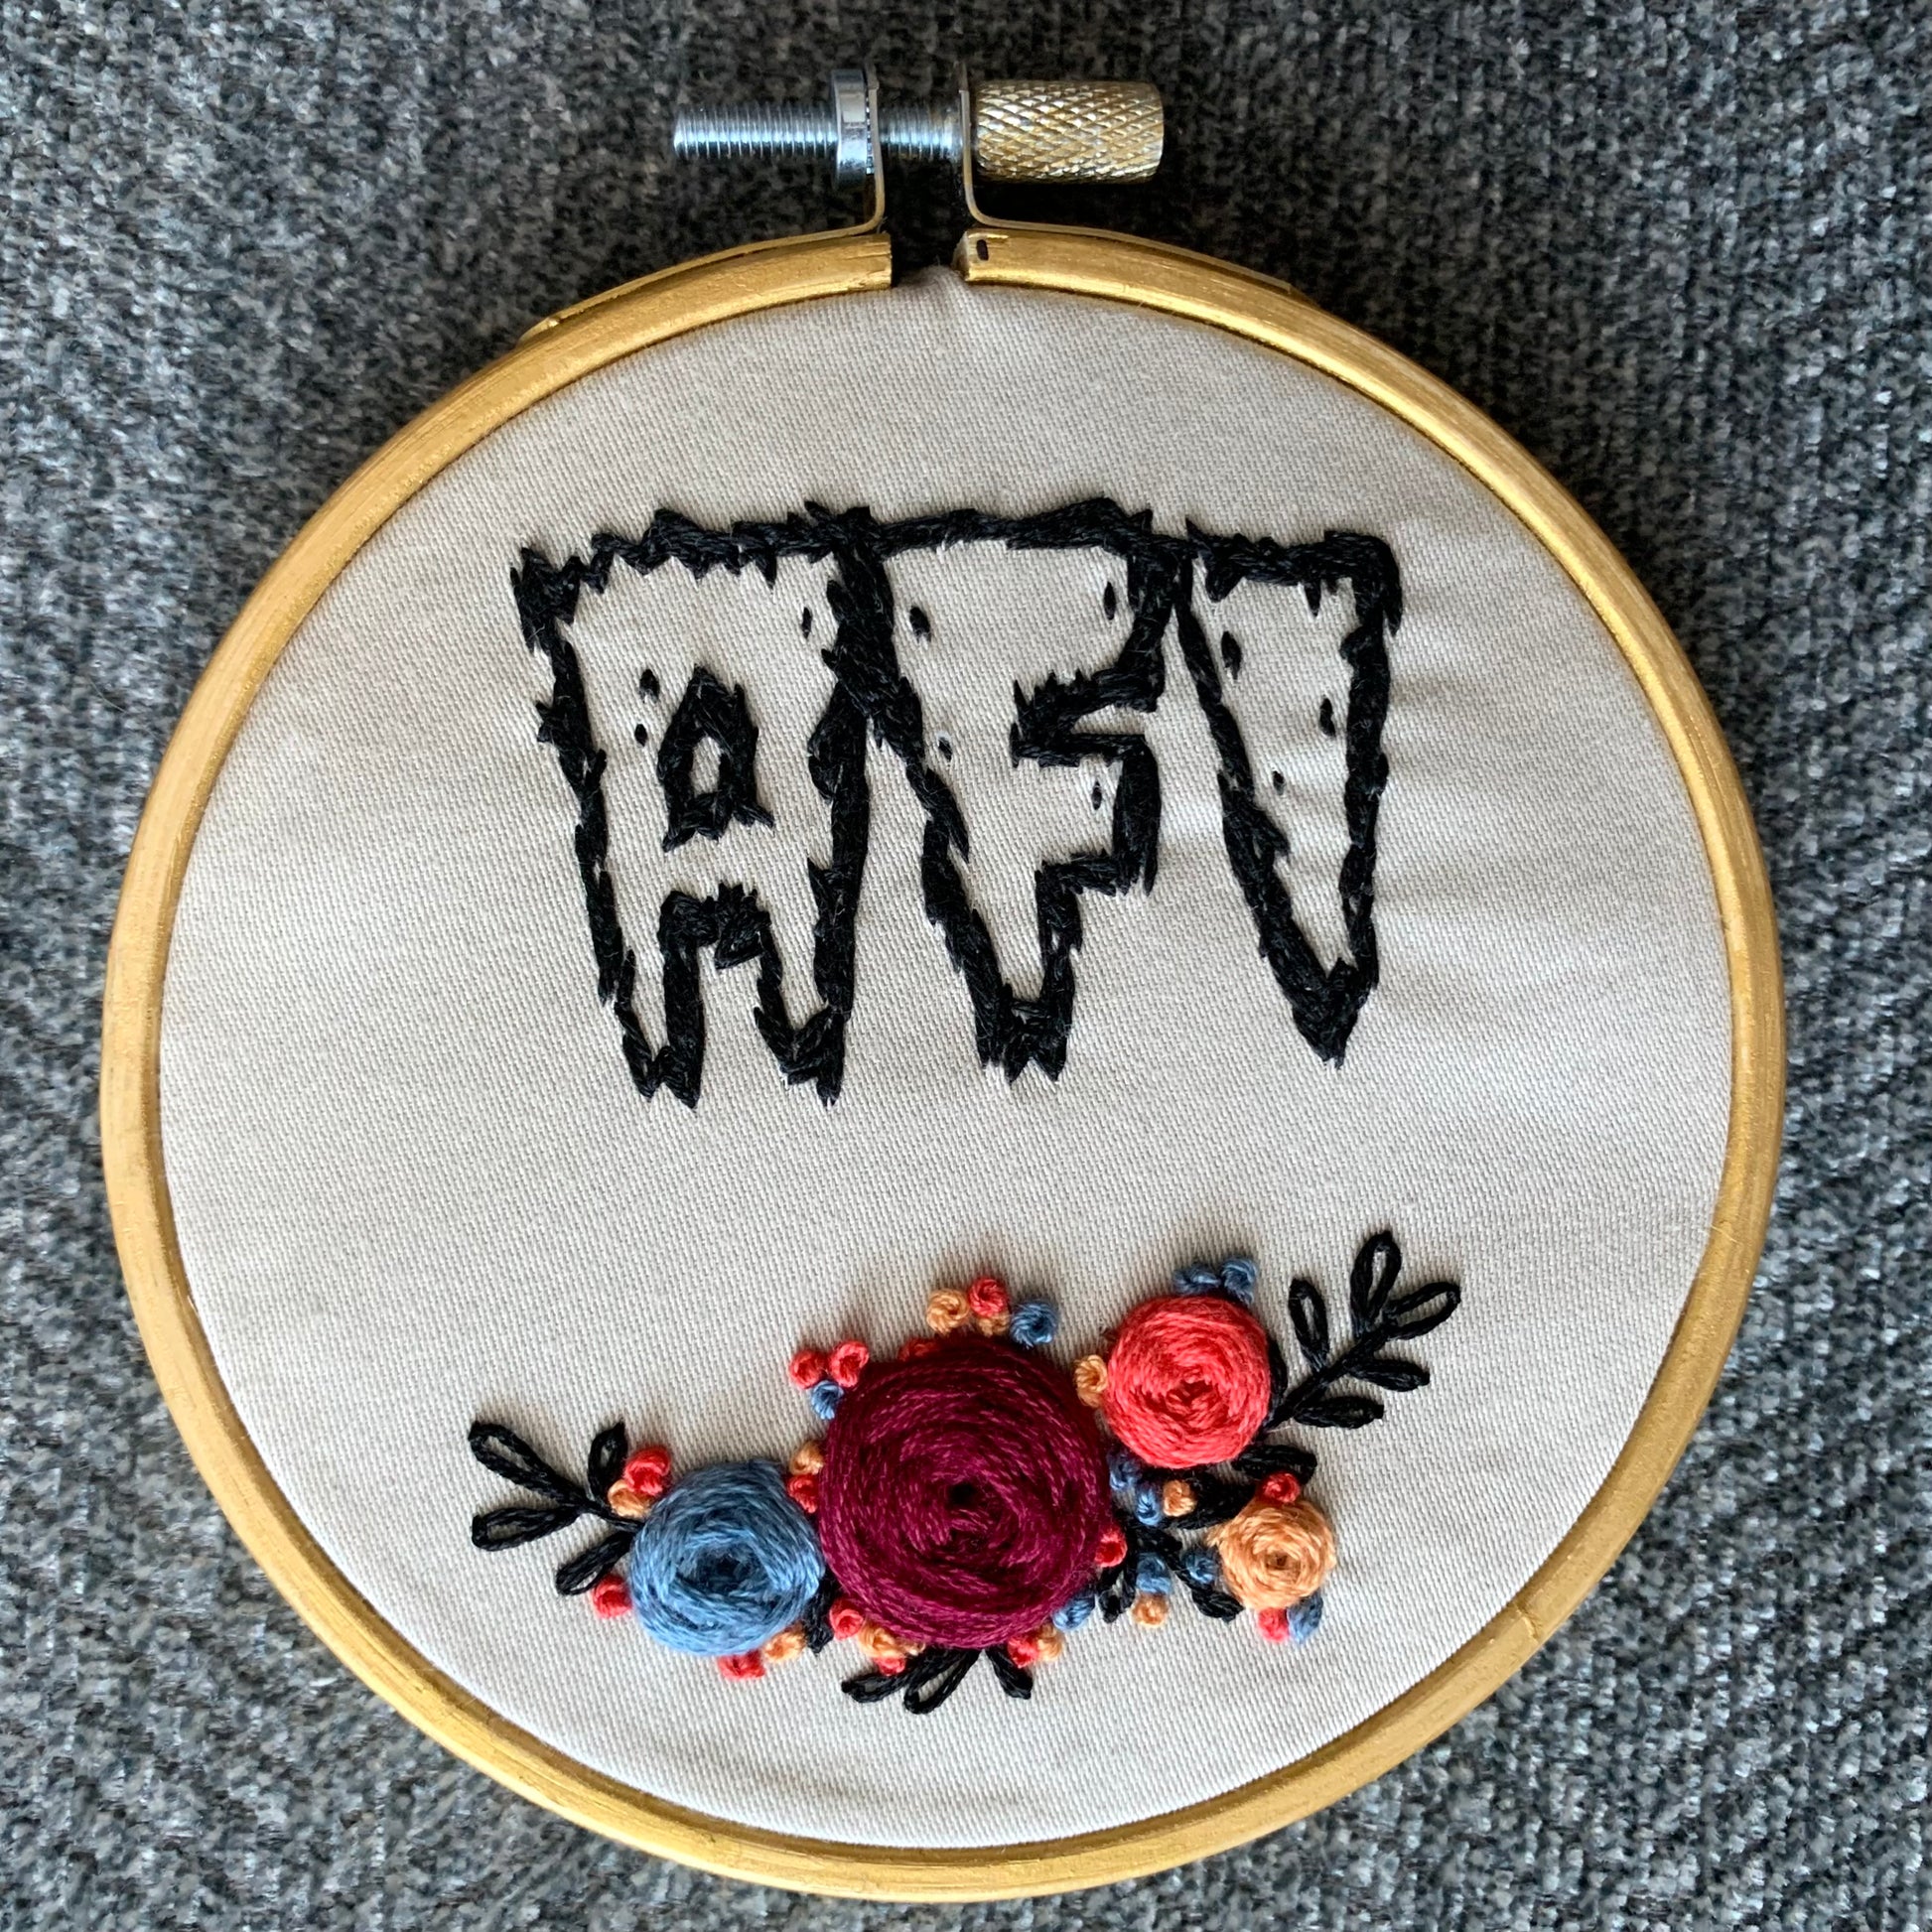 another view of embroidery hoop, AFI A Fire Inside